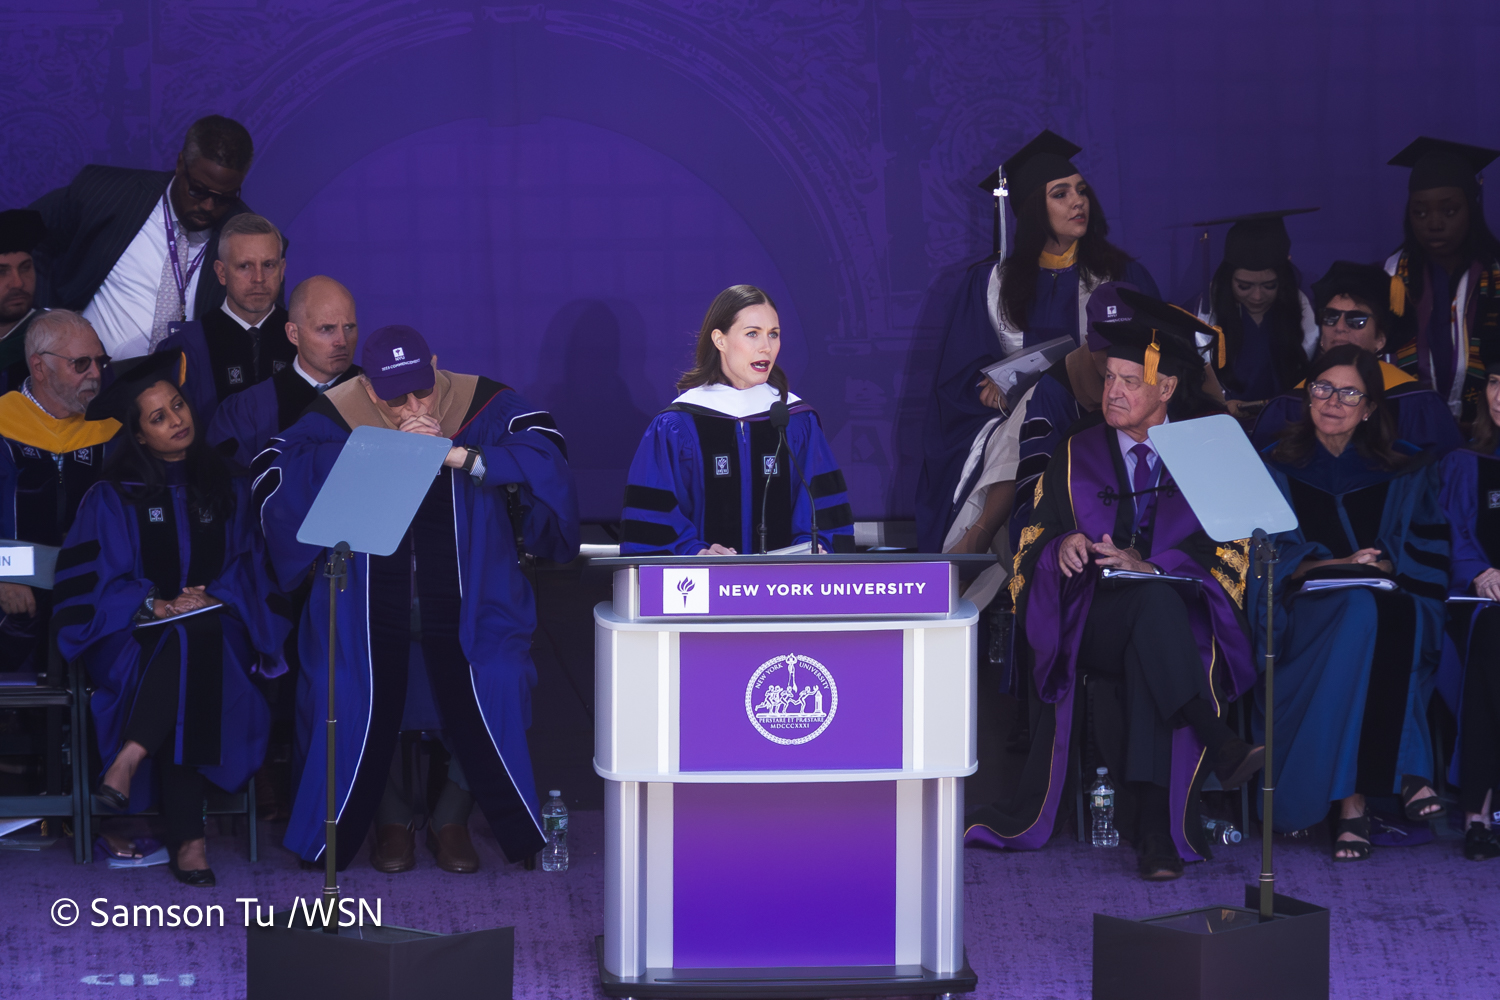 Finnish Prime Minister Sanna Marin delivers her address to the crowd behind a purple podium with a white N.Y.U. emblem and text that read "New York University."